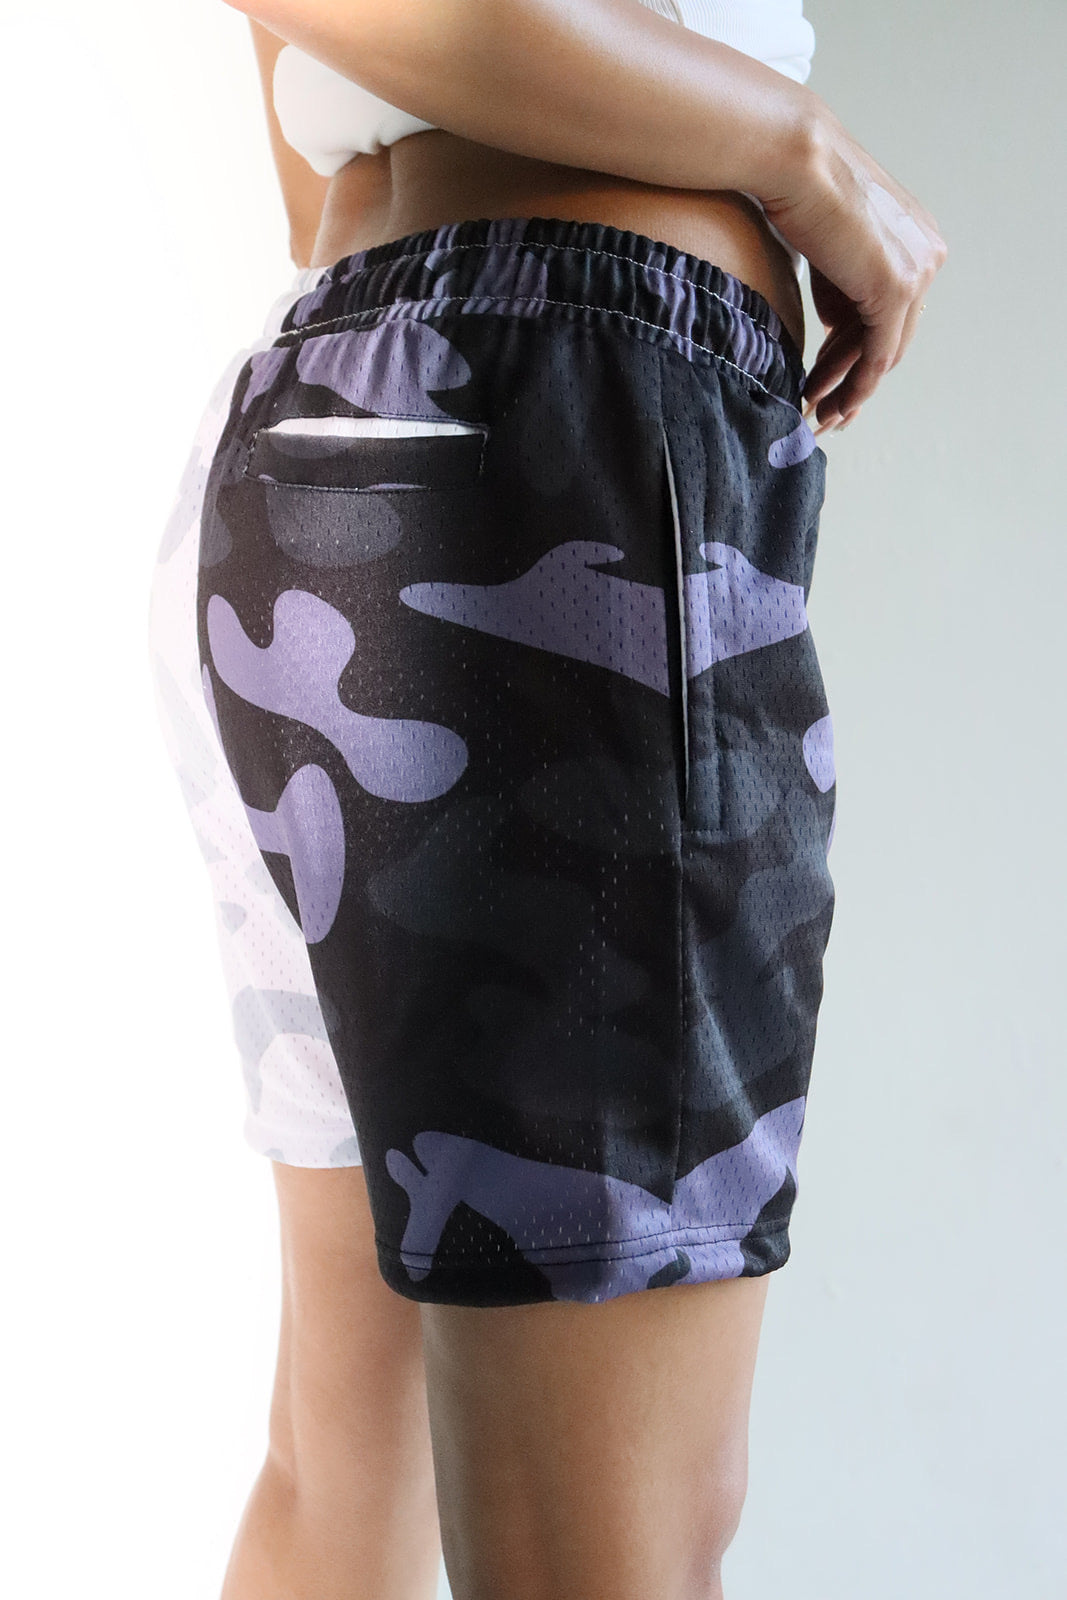 Men's graphic mesh shorts with a picture of white black gray camo